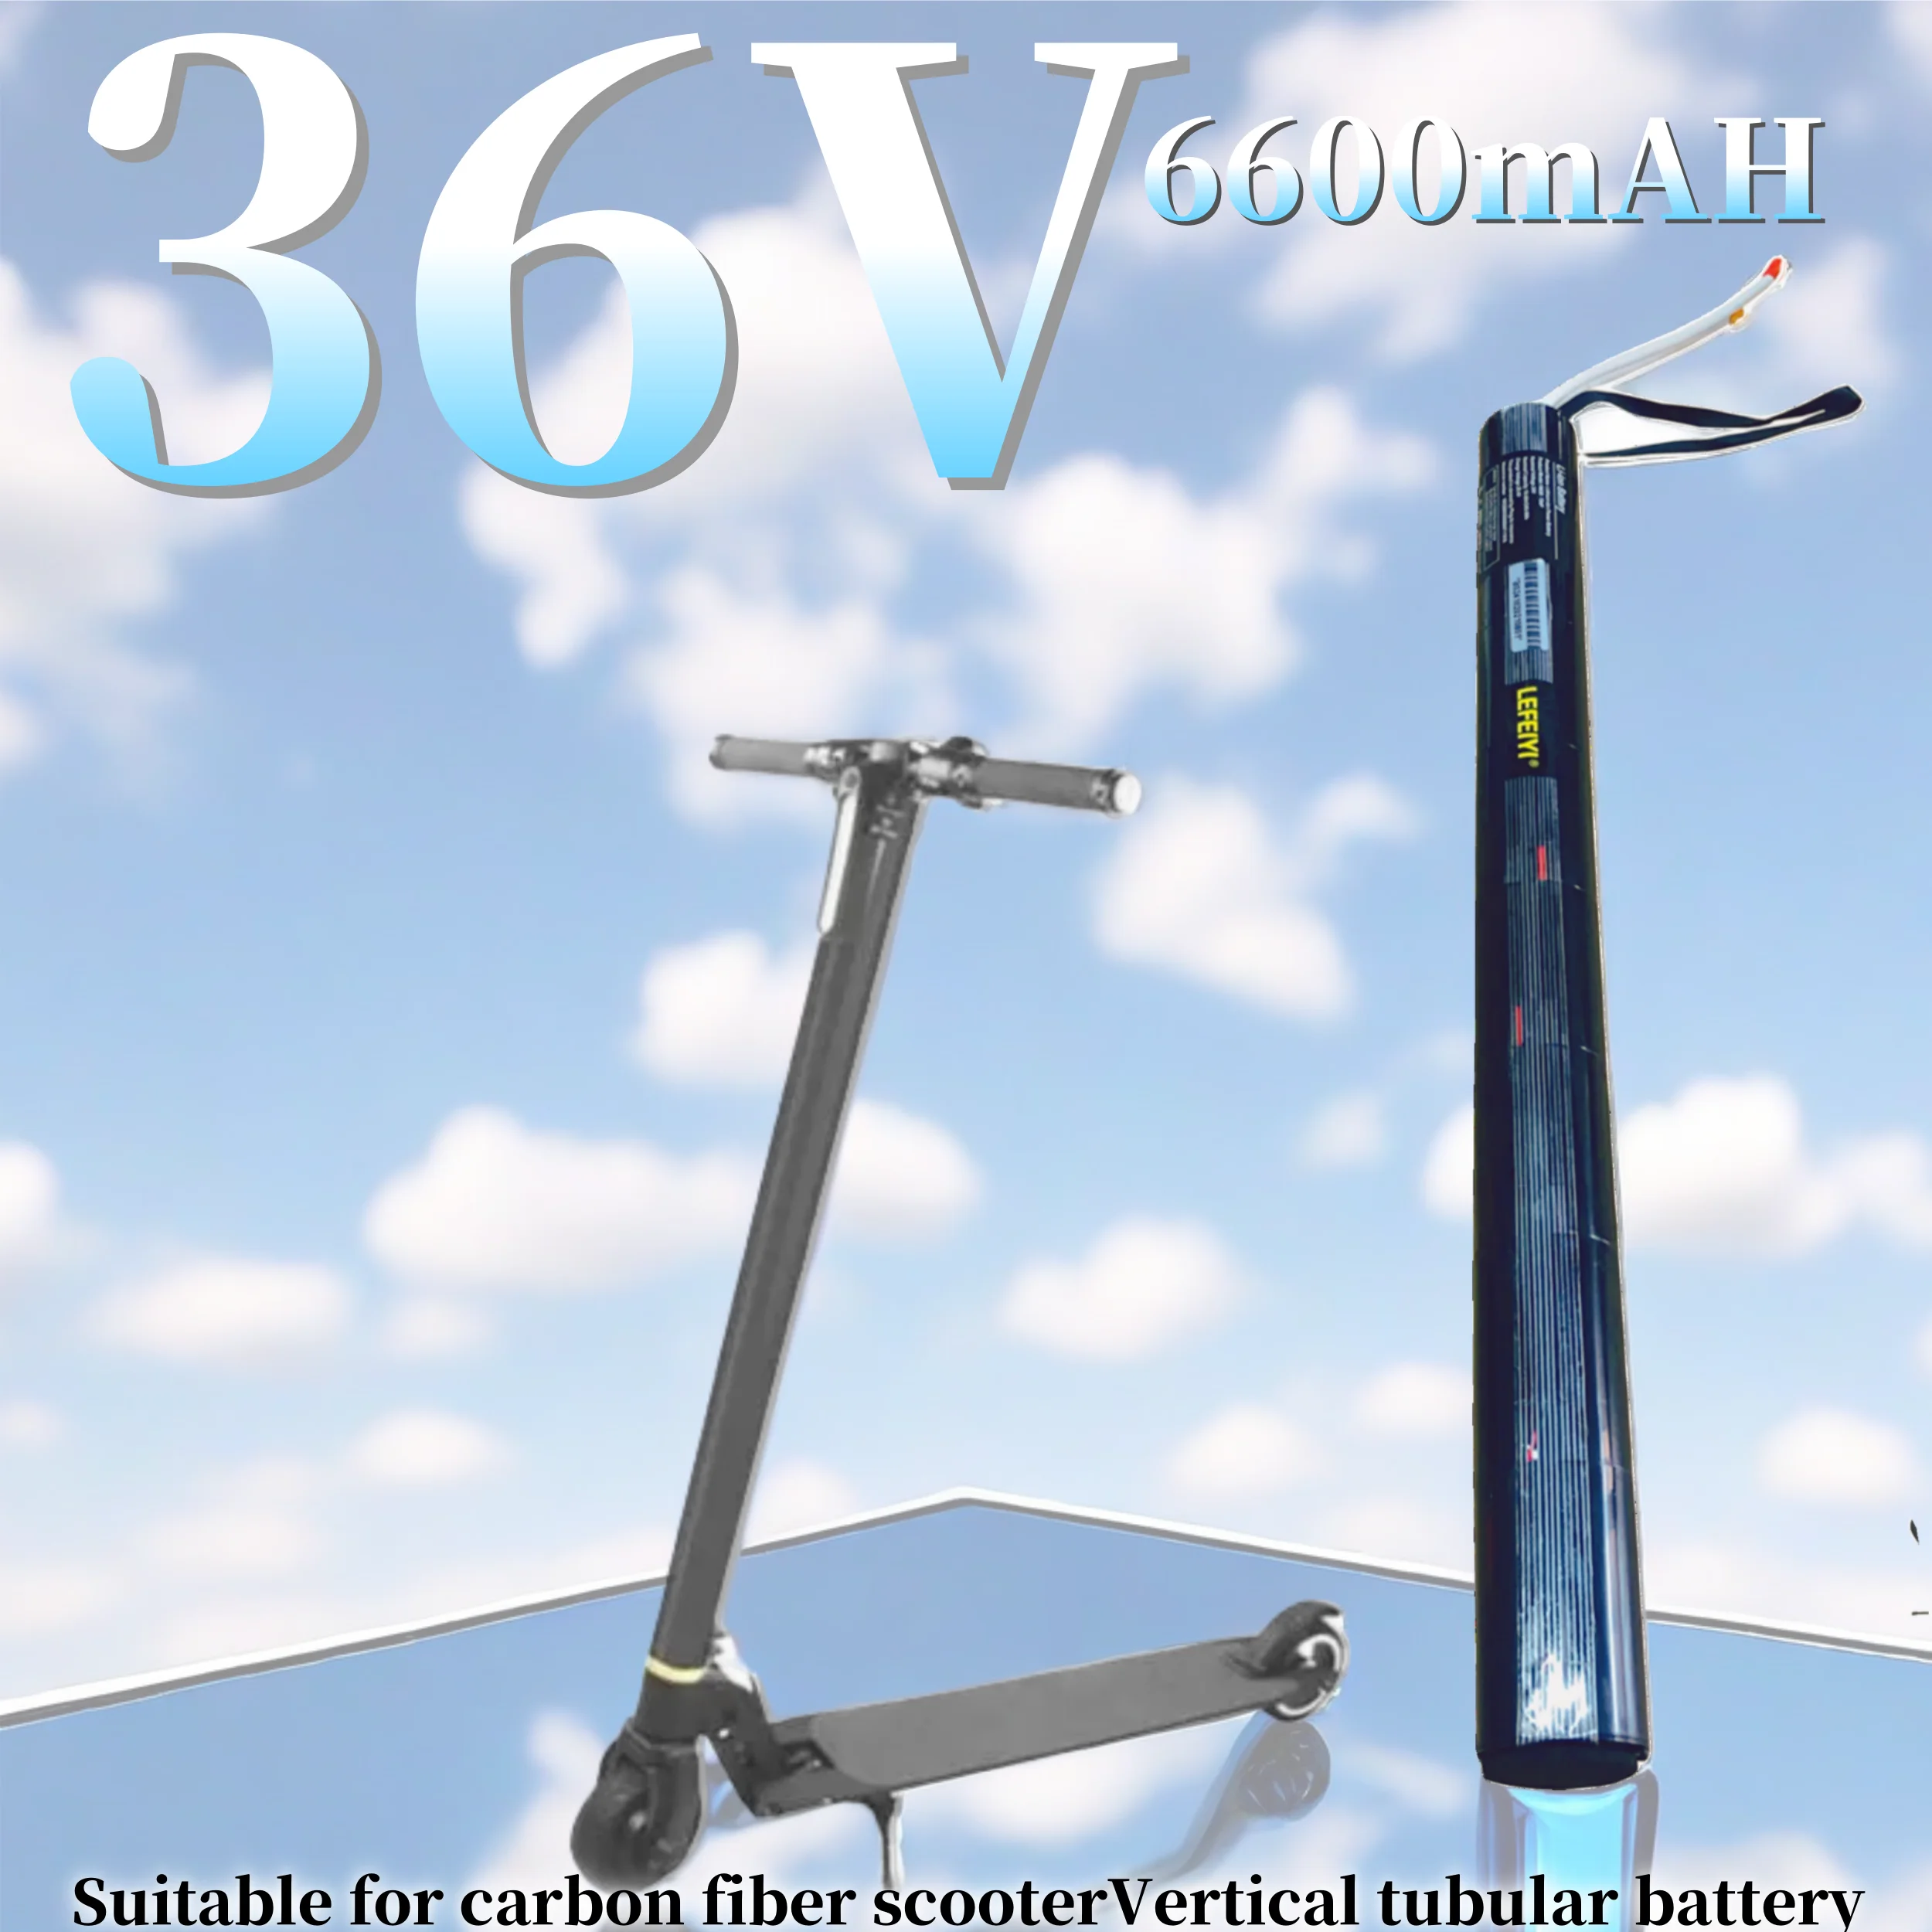 

New 36V/,6600mAH 18650 Lithium Battery Pack with BMS for Carbon Fiber Scooter